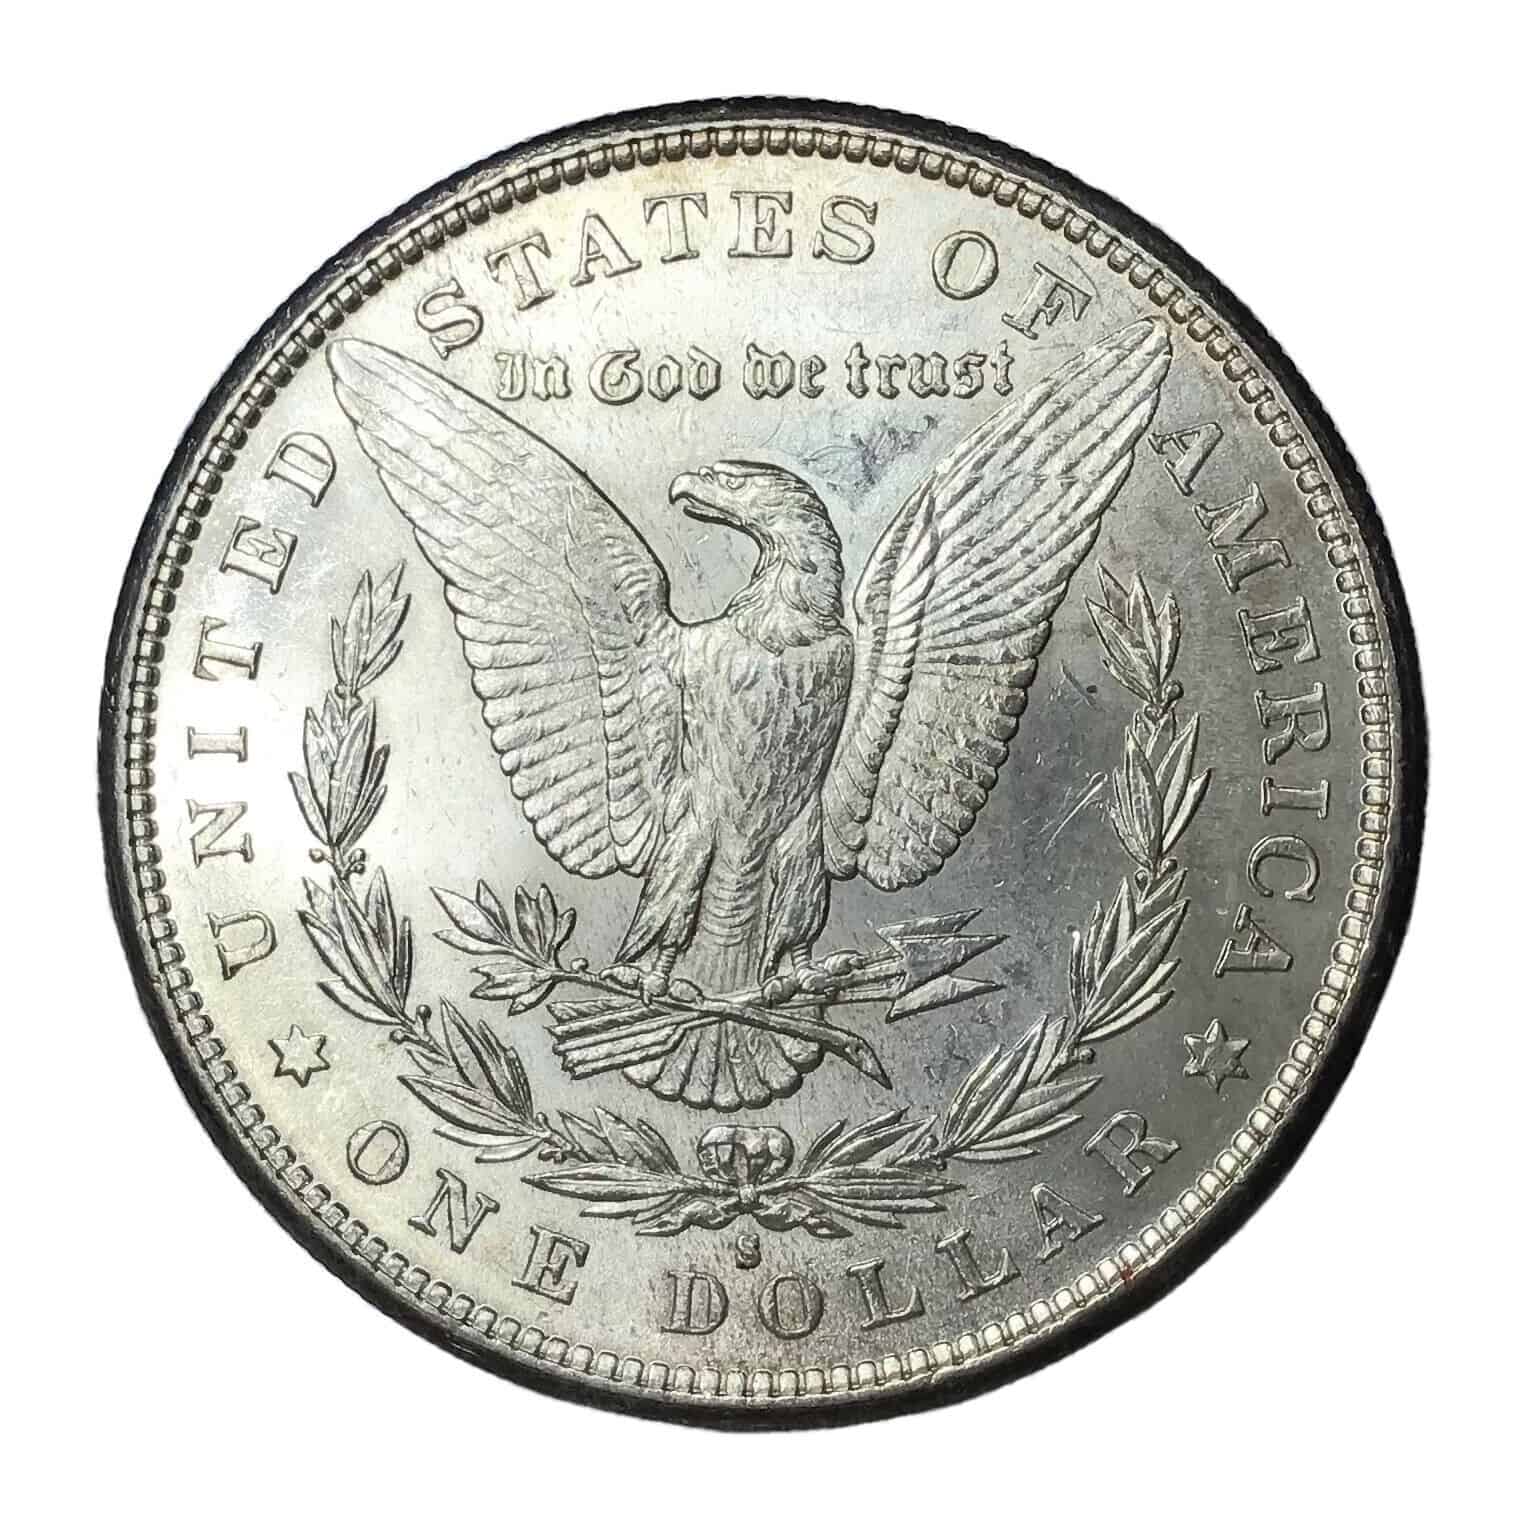 The Reverse of the 1881 Silver Dollar